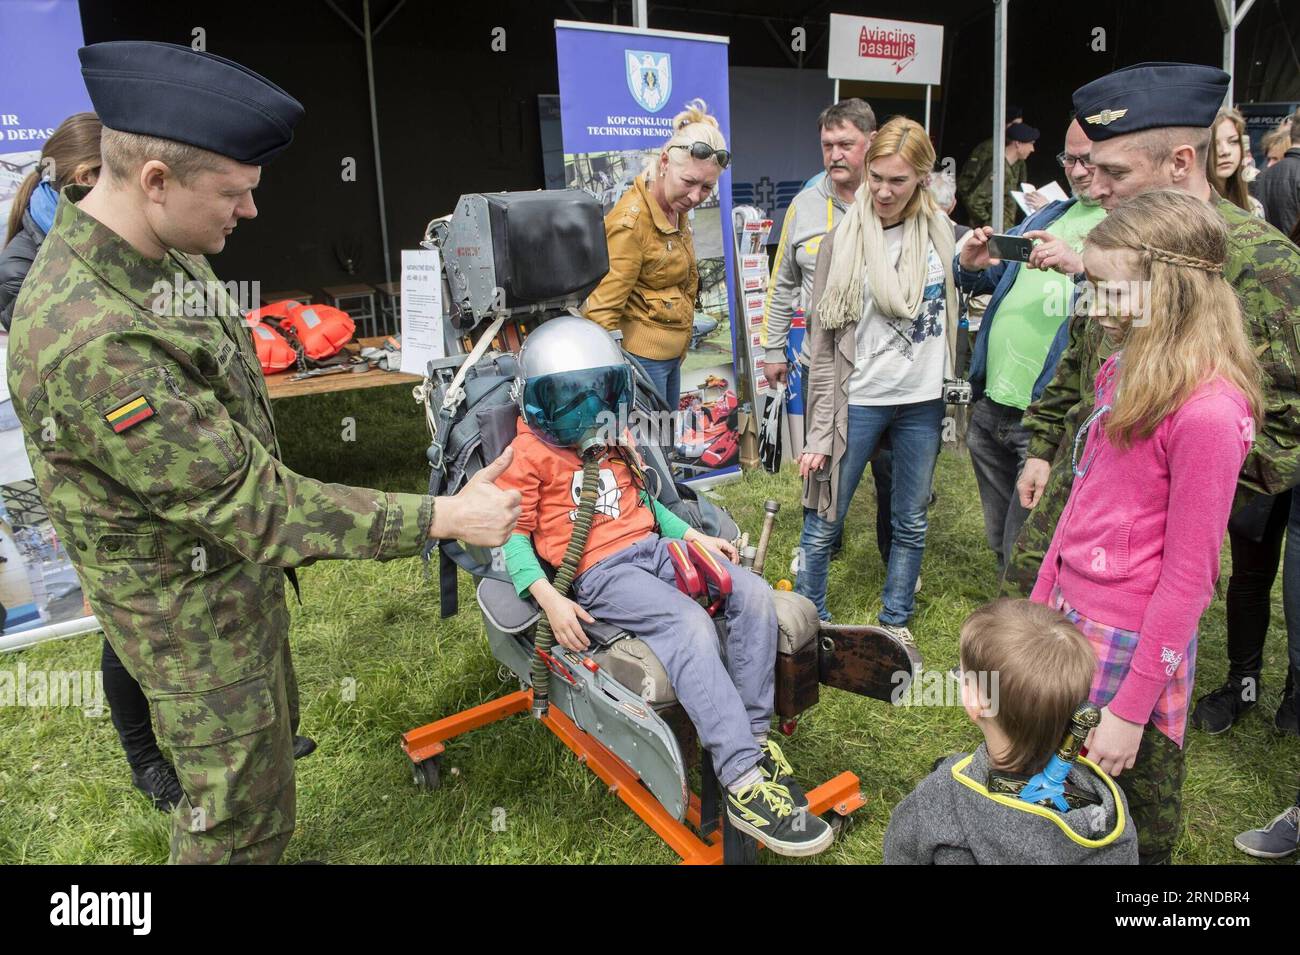 (160515) -- VILNIUS, May 14, 2016 -- A child is experiencing the seat of military aircraft in Vilnius, Lithuania, May 14, 2016. Lithuania celebrates Armed Forces and Public Unity Day in it s captial on Saturday. Troops of Lithuania, Germany, U.S., Luxembourg, Portugal, etc. brought their light weapons, military vehicles and other equipment to the public. Fighting Falcon F-16 of Portuguese air force and Black Hawk of the U.S. air force participated in the performance. ) LITHUANIA-VILNIUS-ARMED FORCES AND PUBLIC UNITY DAY AlfredasxPliadis PUBLICATIONxNOTxINxCHN   160515 Vilnius May 14 2016 a Chi Stock Photo